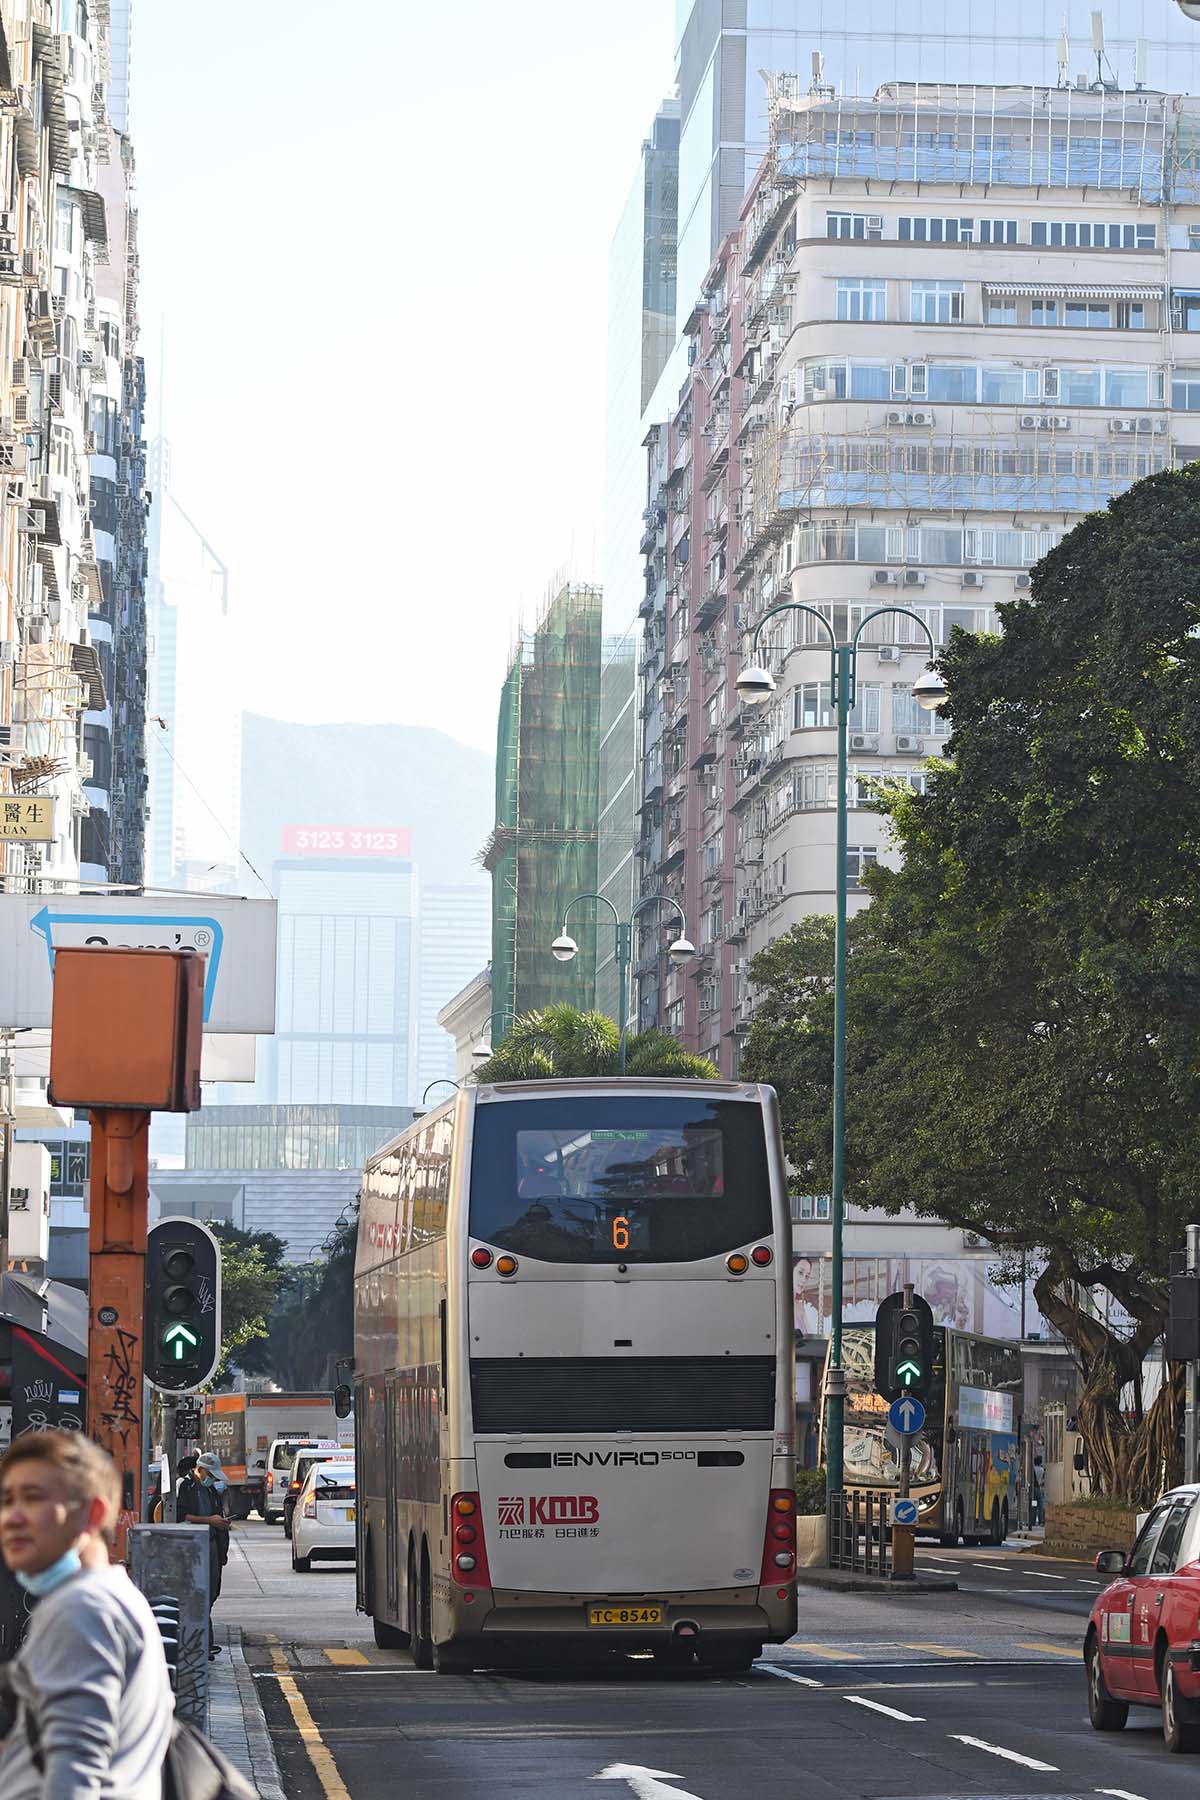 photograph of a bus in a city